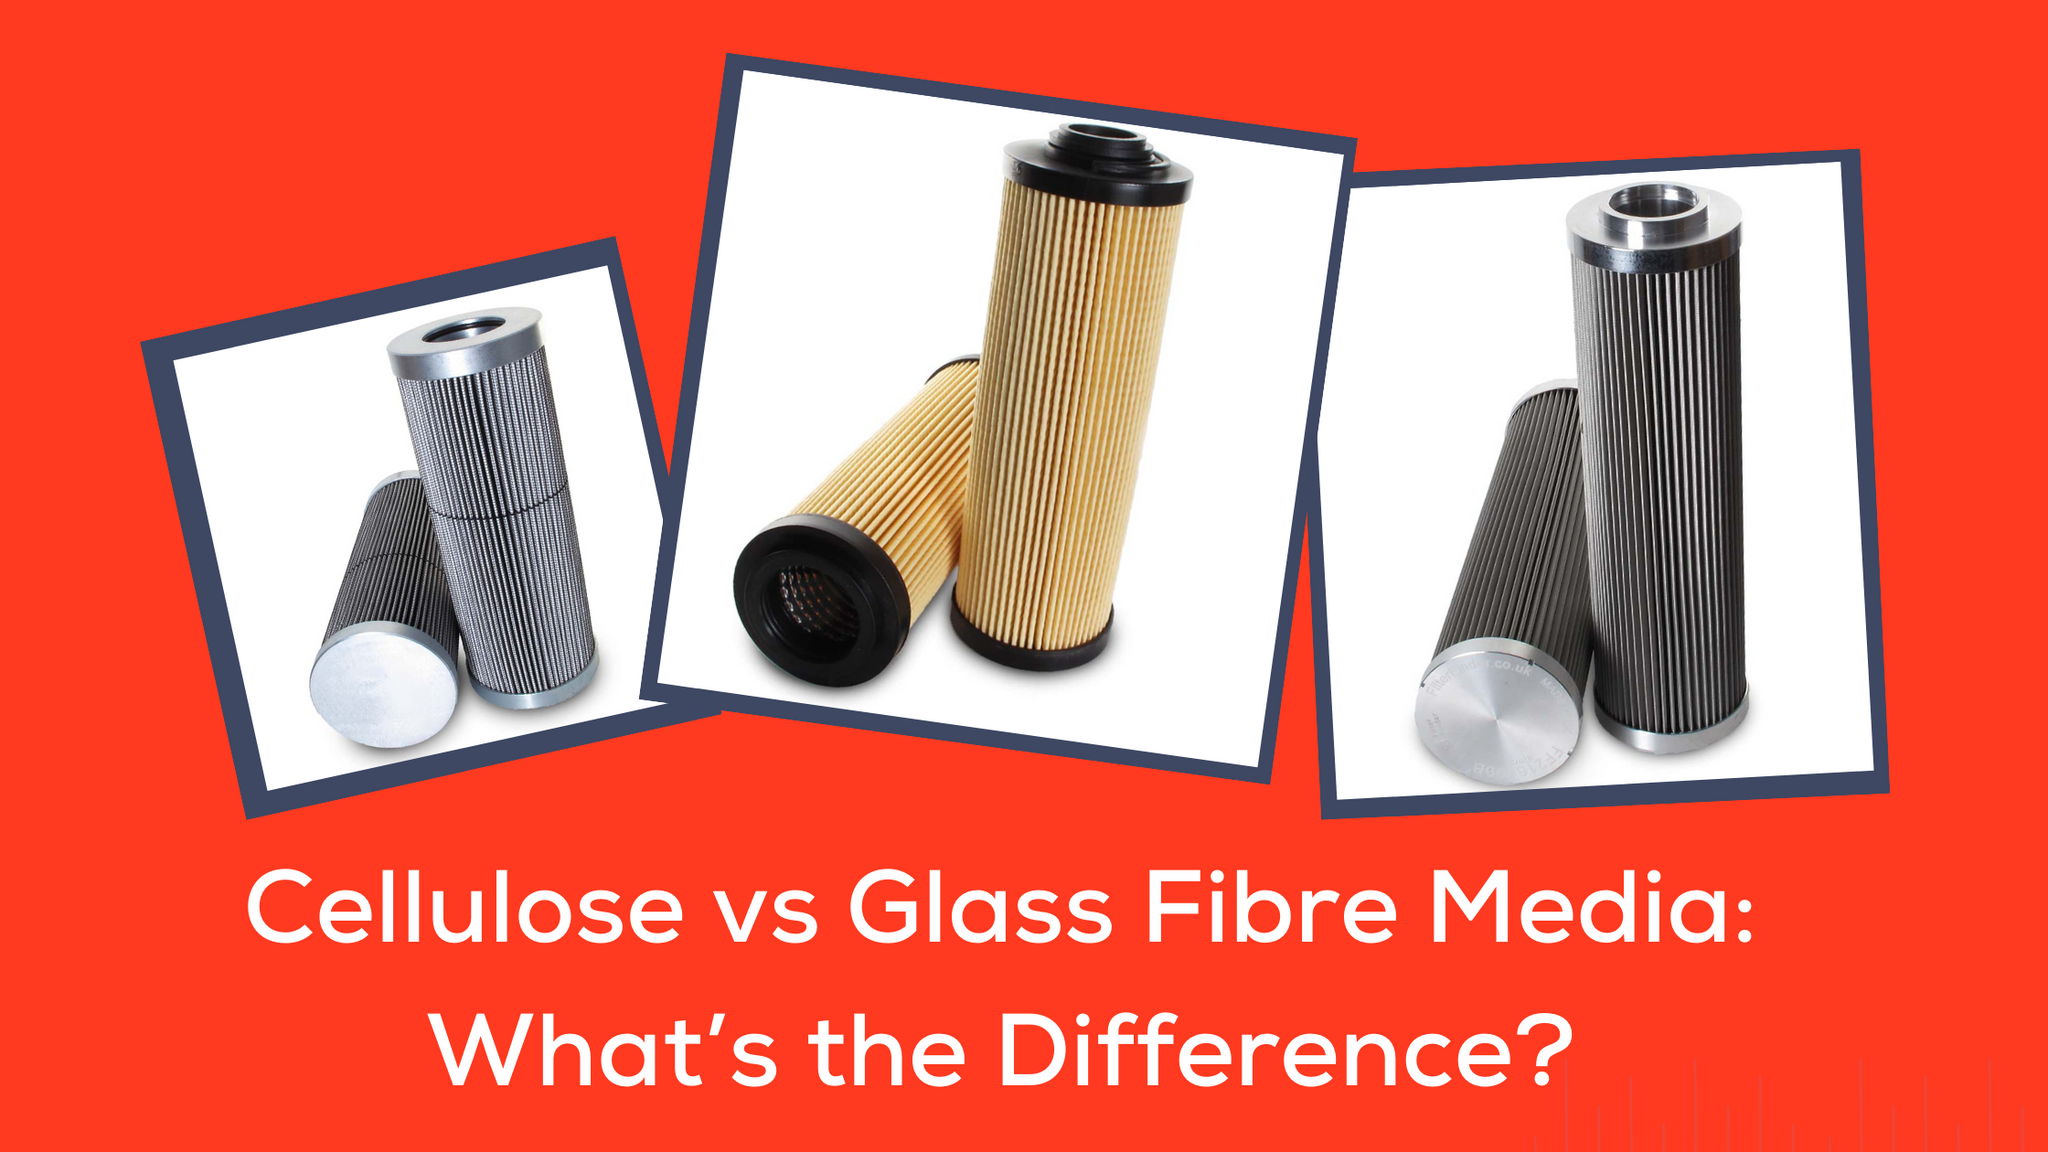 Cellulose vs Glass Fibre Media: What’s the Difference?